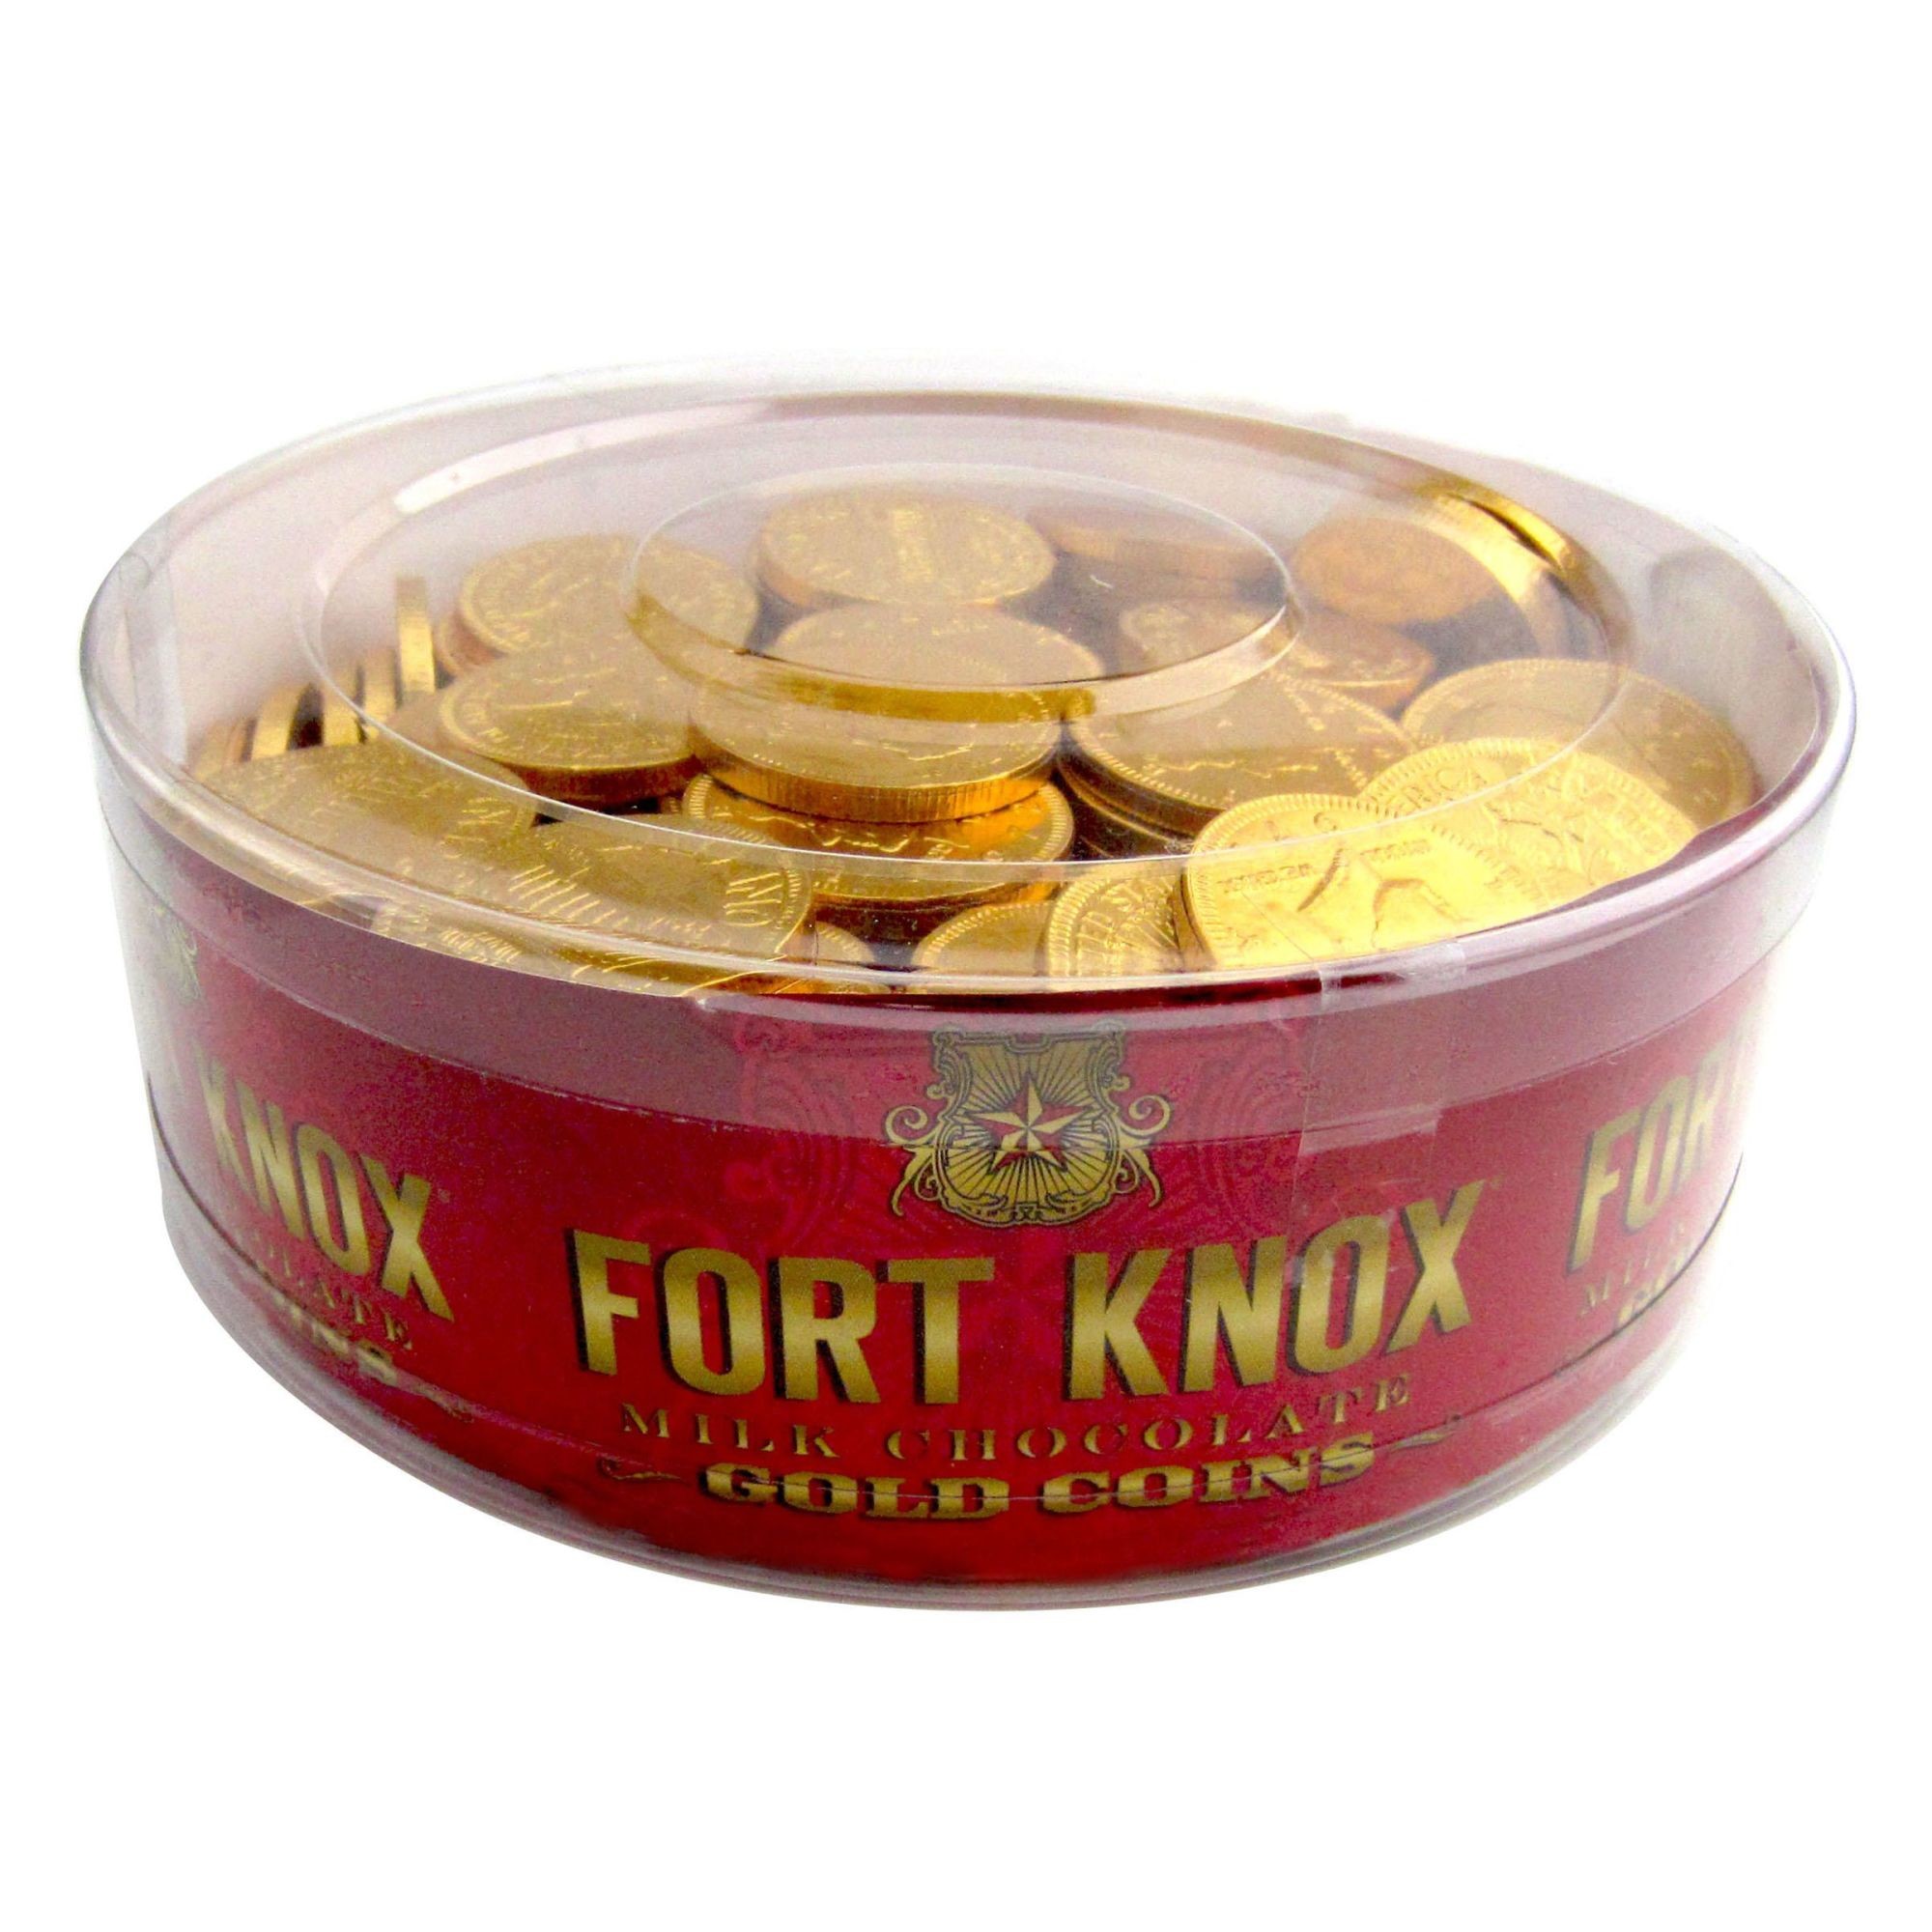 Fort Knox - Currency Items